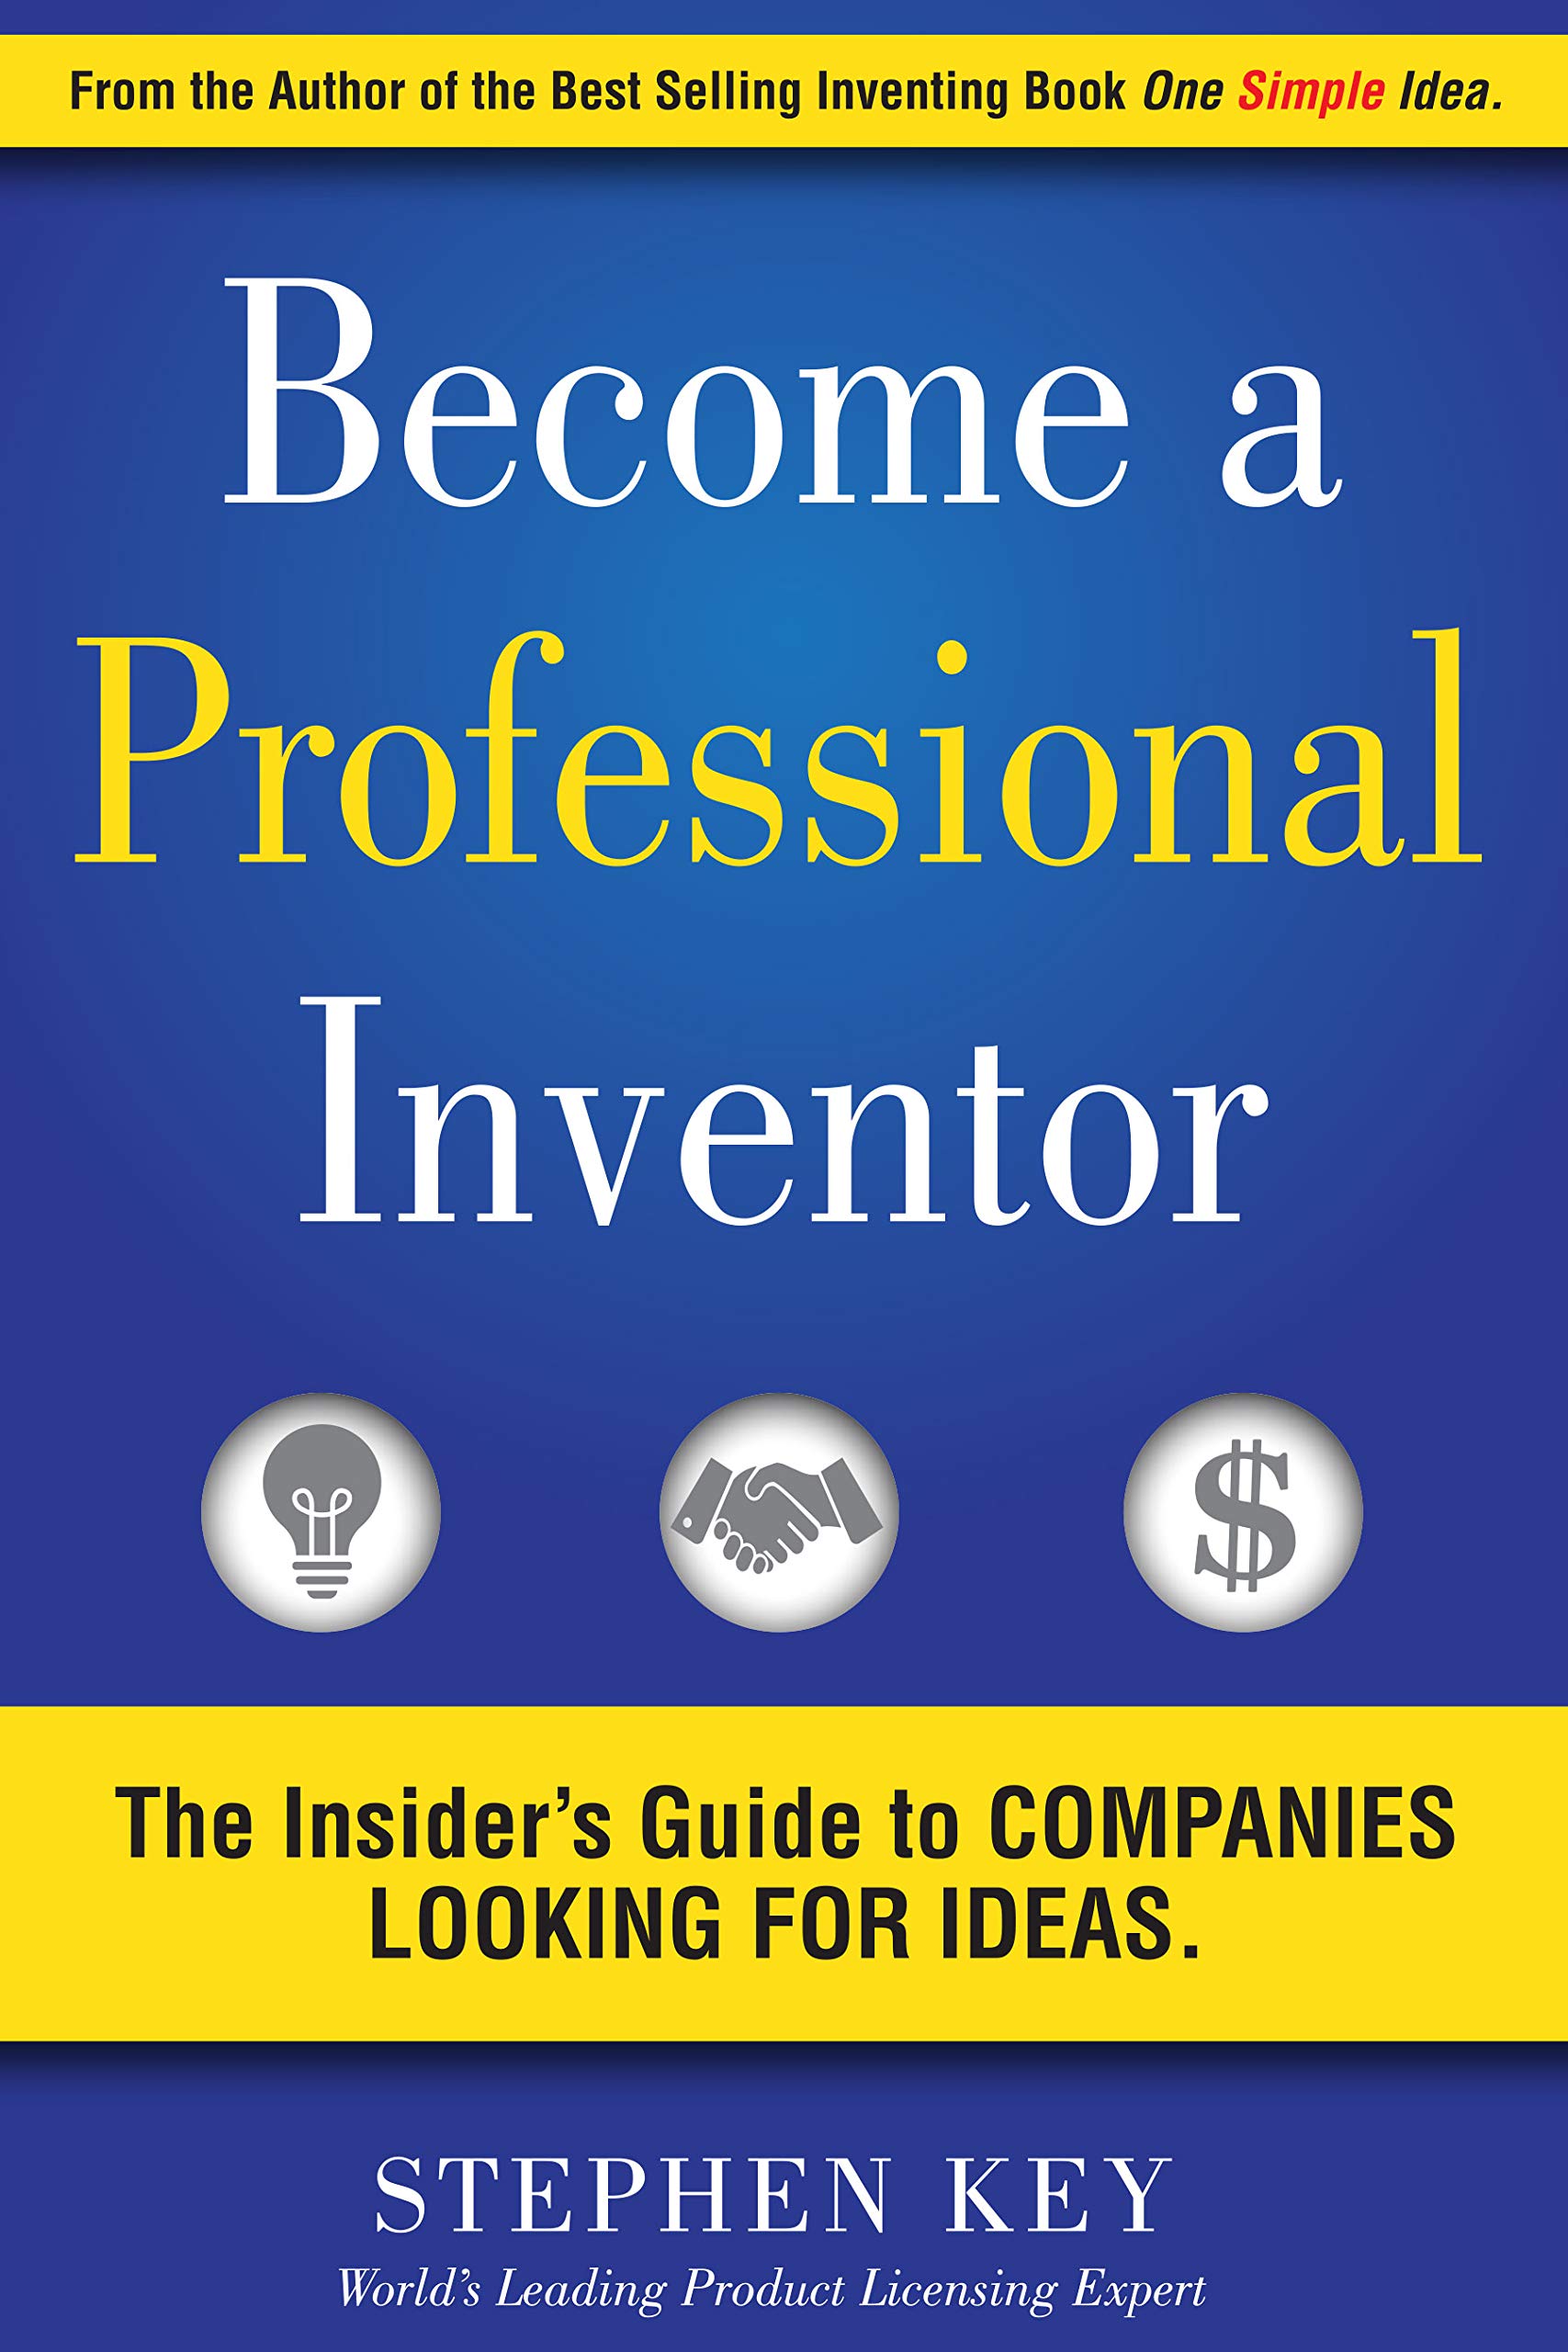 Amazon.com: Become a Professional Inventor: The Insider's Guide to Companies Looking for Ideas eBook : Key, Stephen: Kindle Store